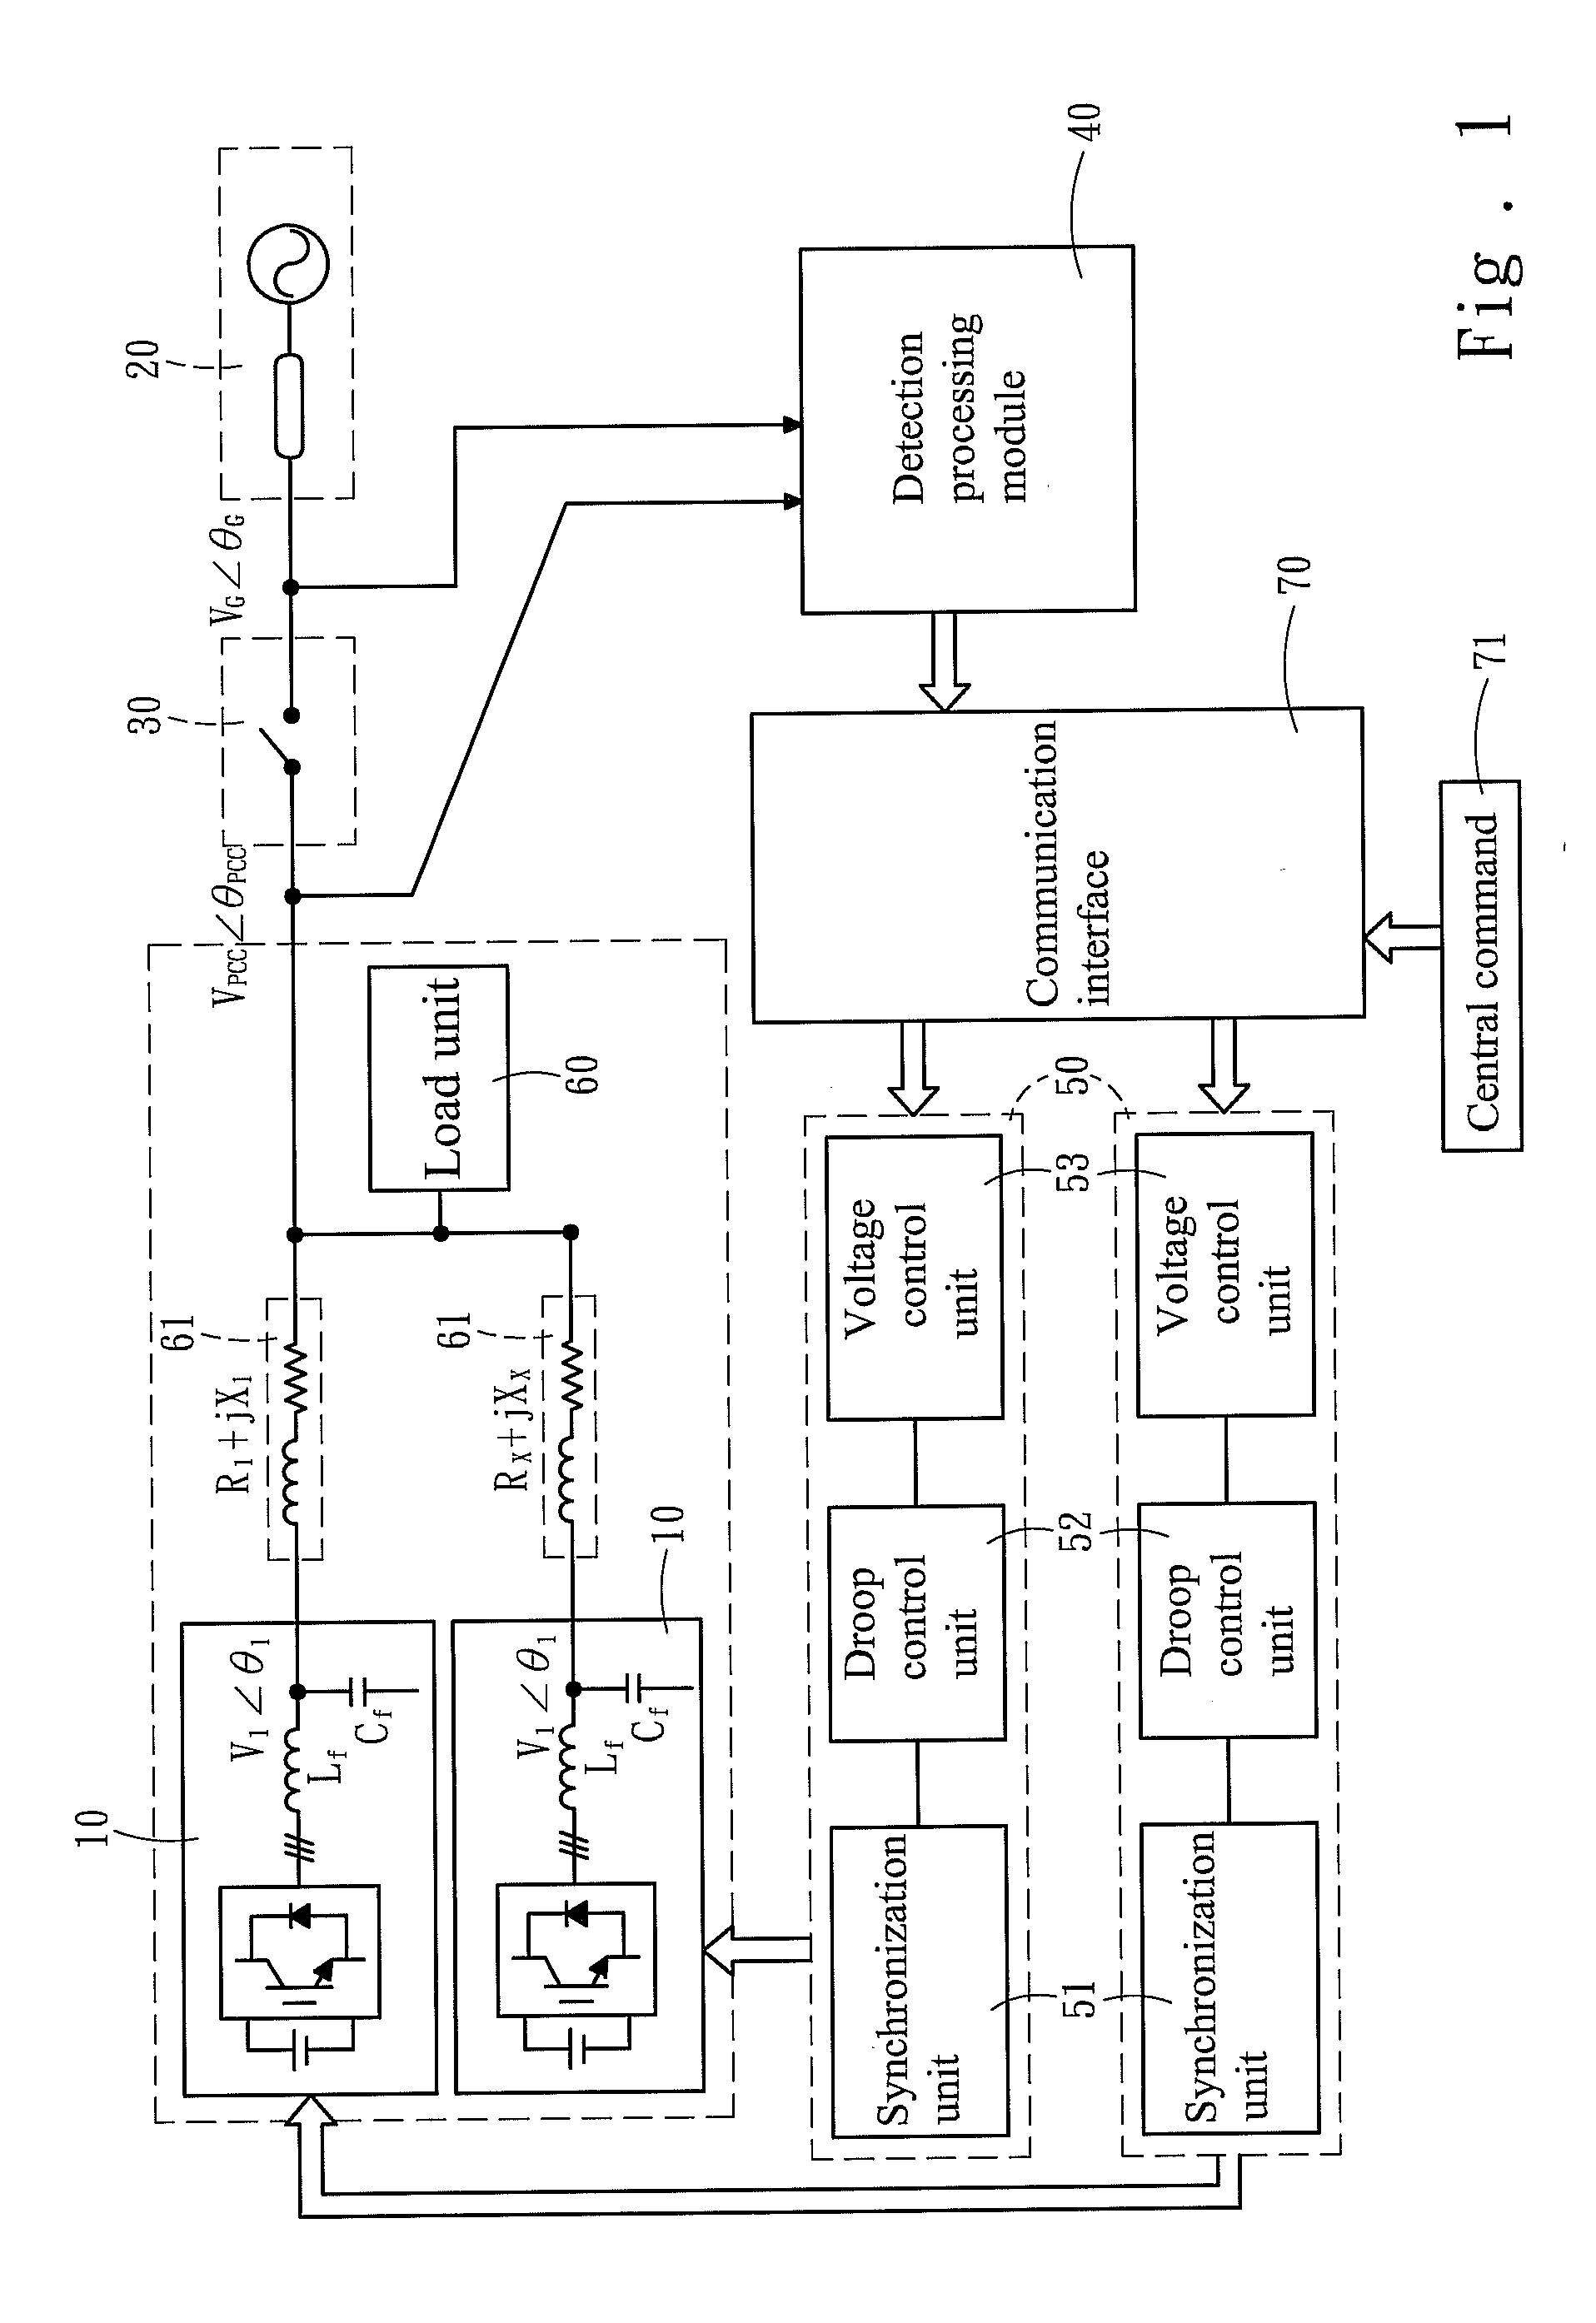 Droop control system for grid-connected synchronization